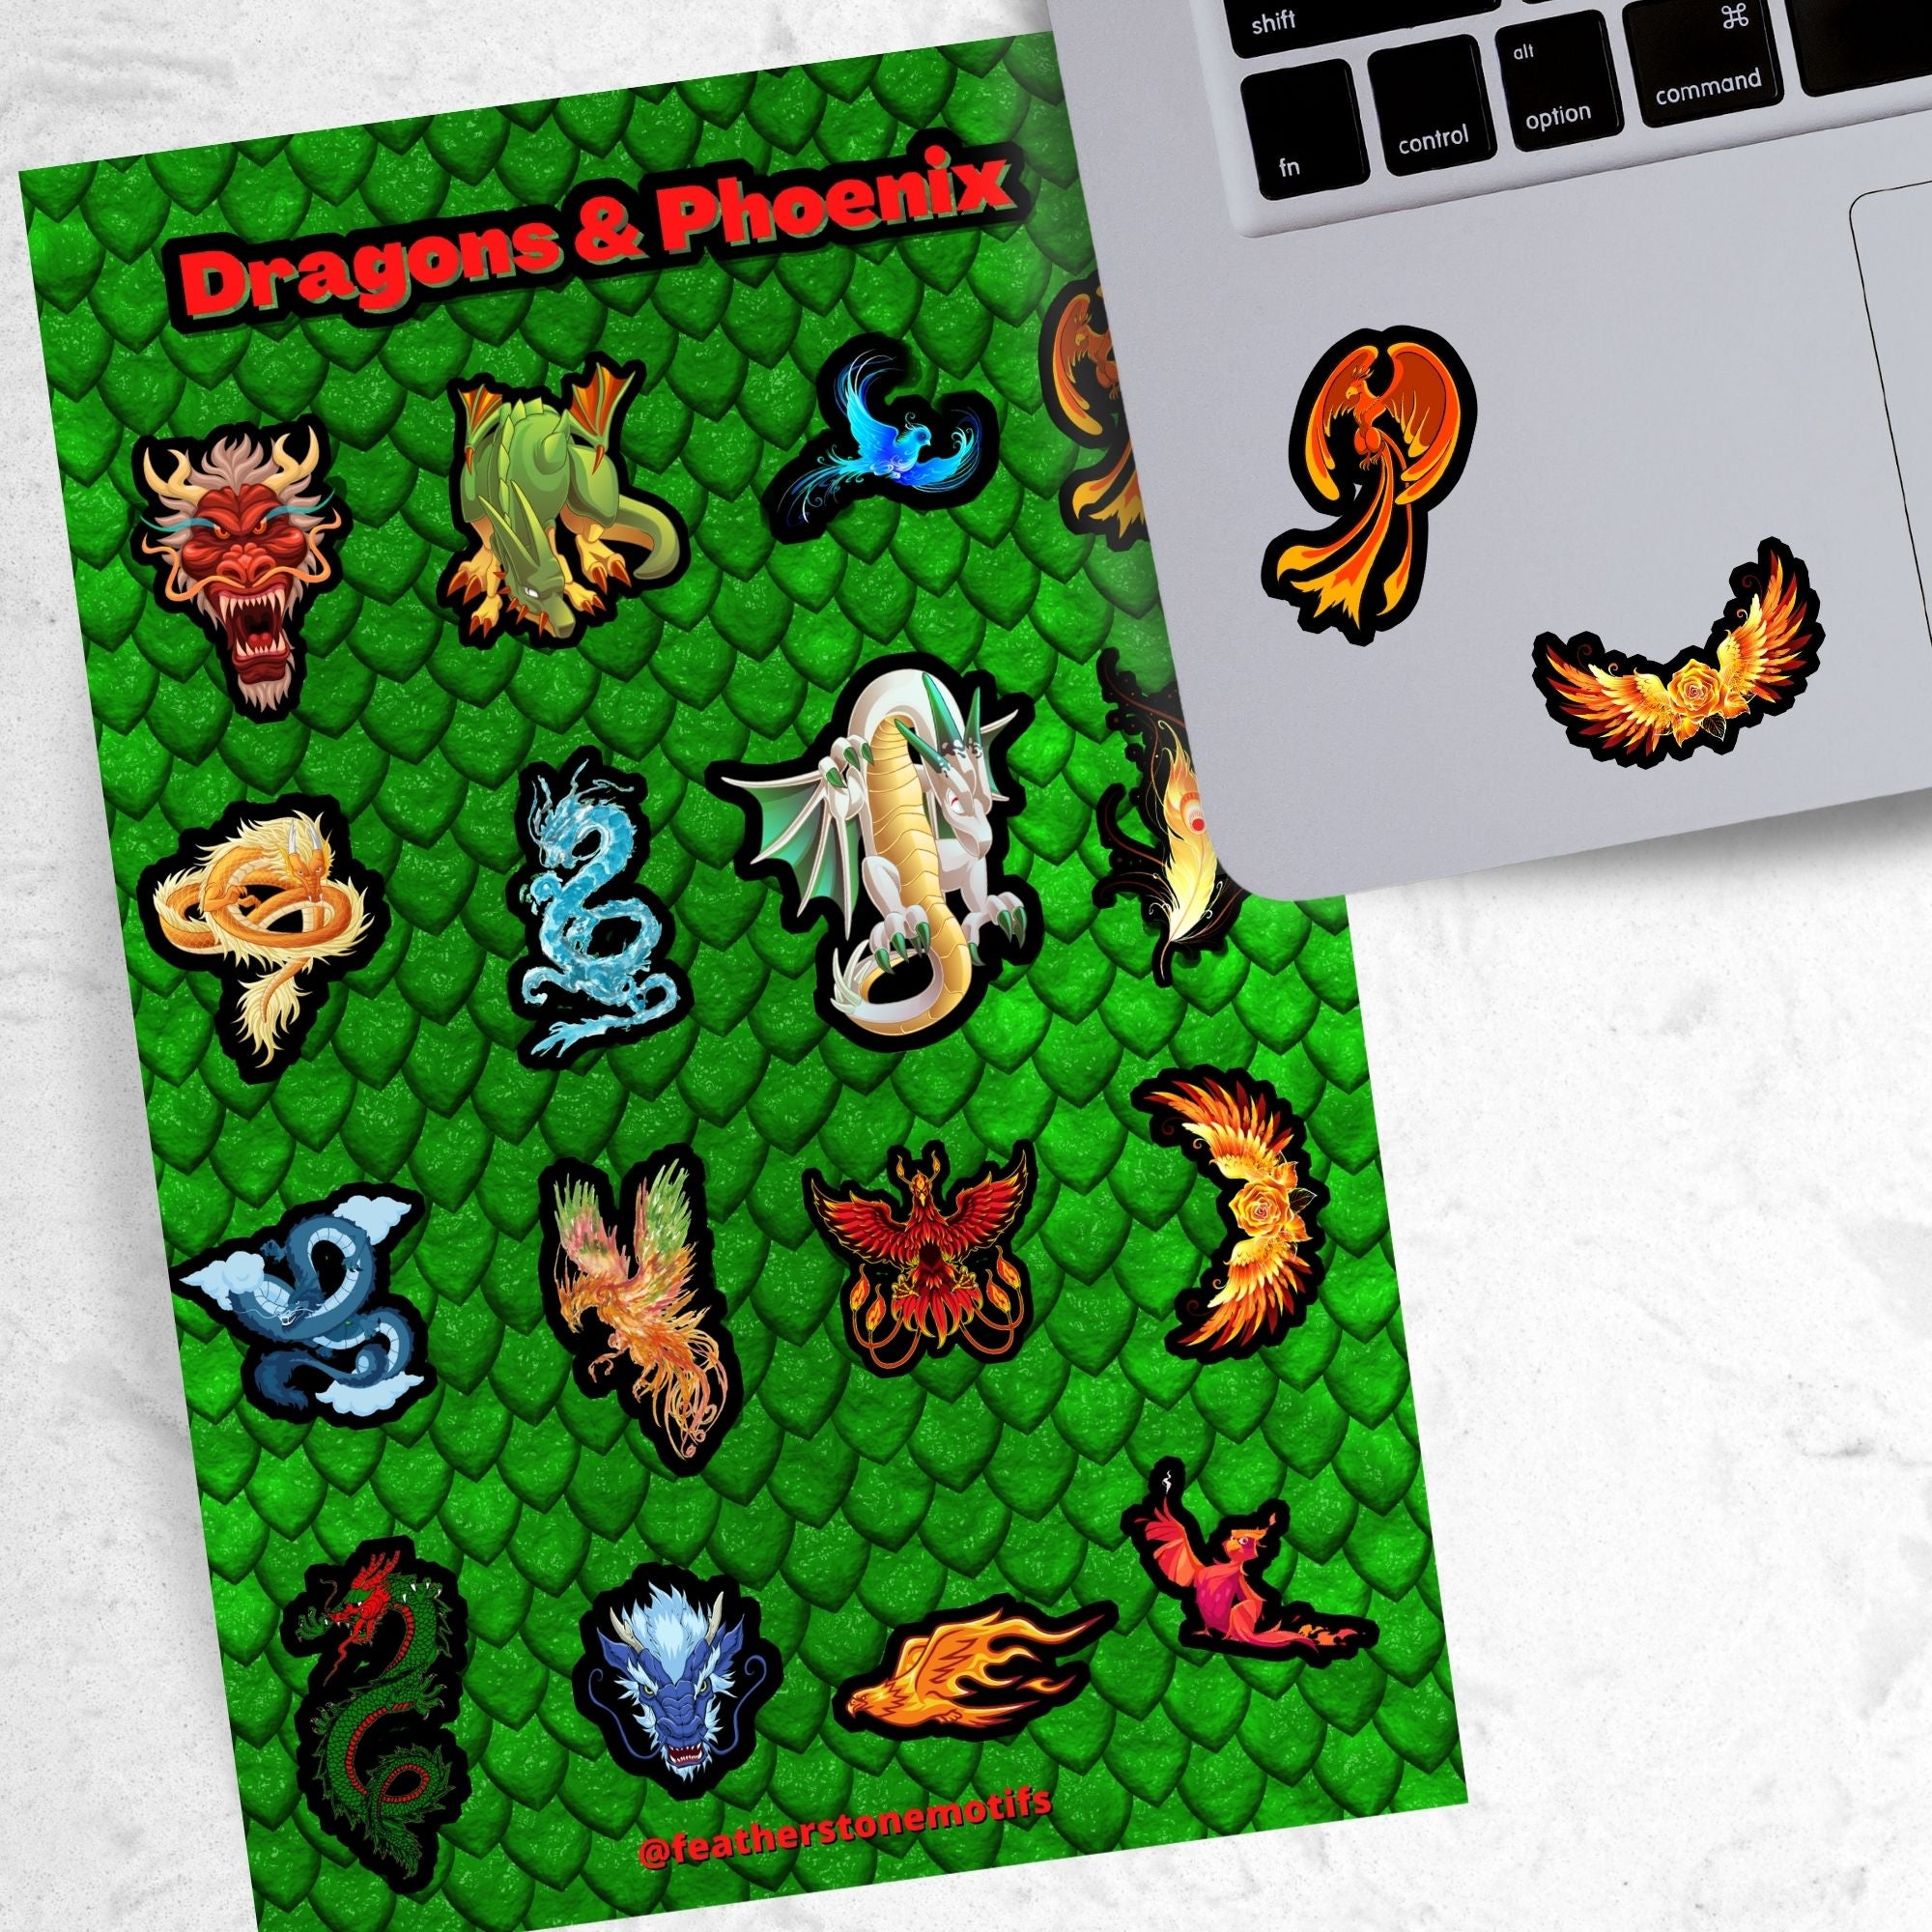 Set on a background of green scales, this sticker sheet has 16 different stickers of dragons and phoenix. This image shows the sticker sheet next to an open laptop with two phoenix stickers applied below the keyboard.